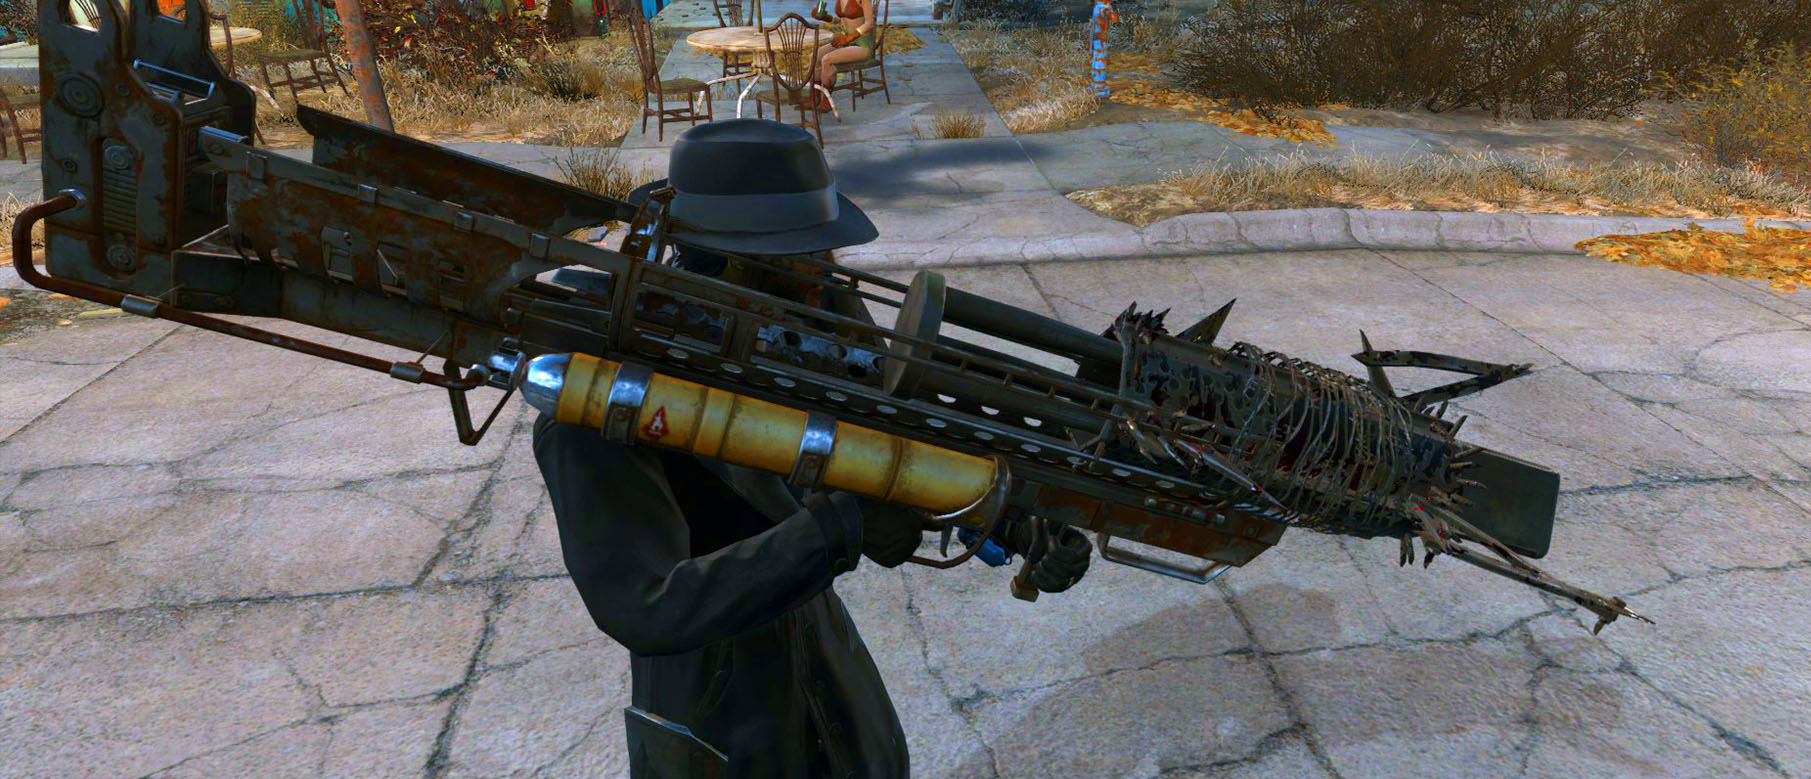 Fallout 4 lowered weapons dlc addon фото 29